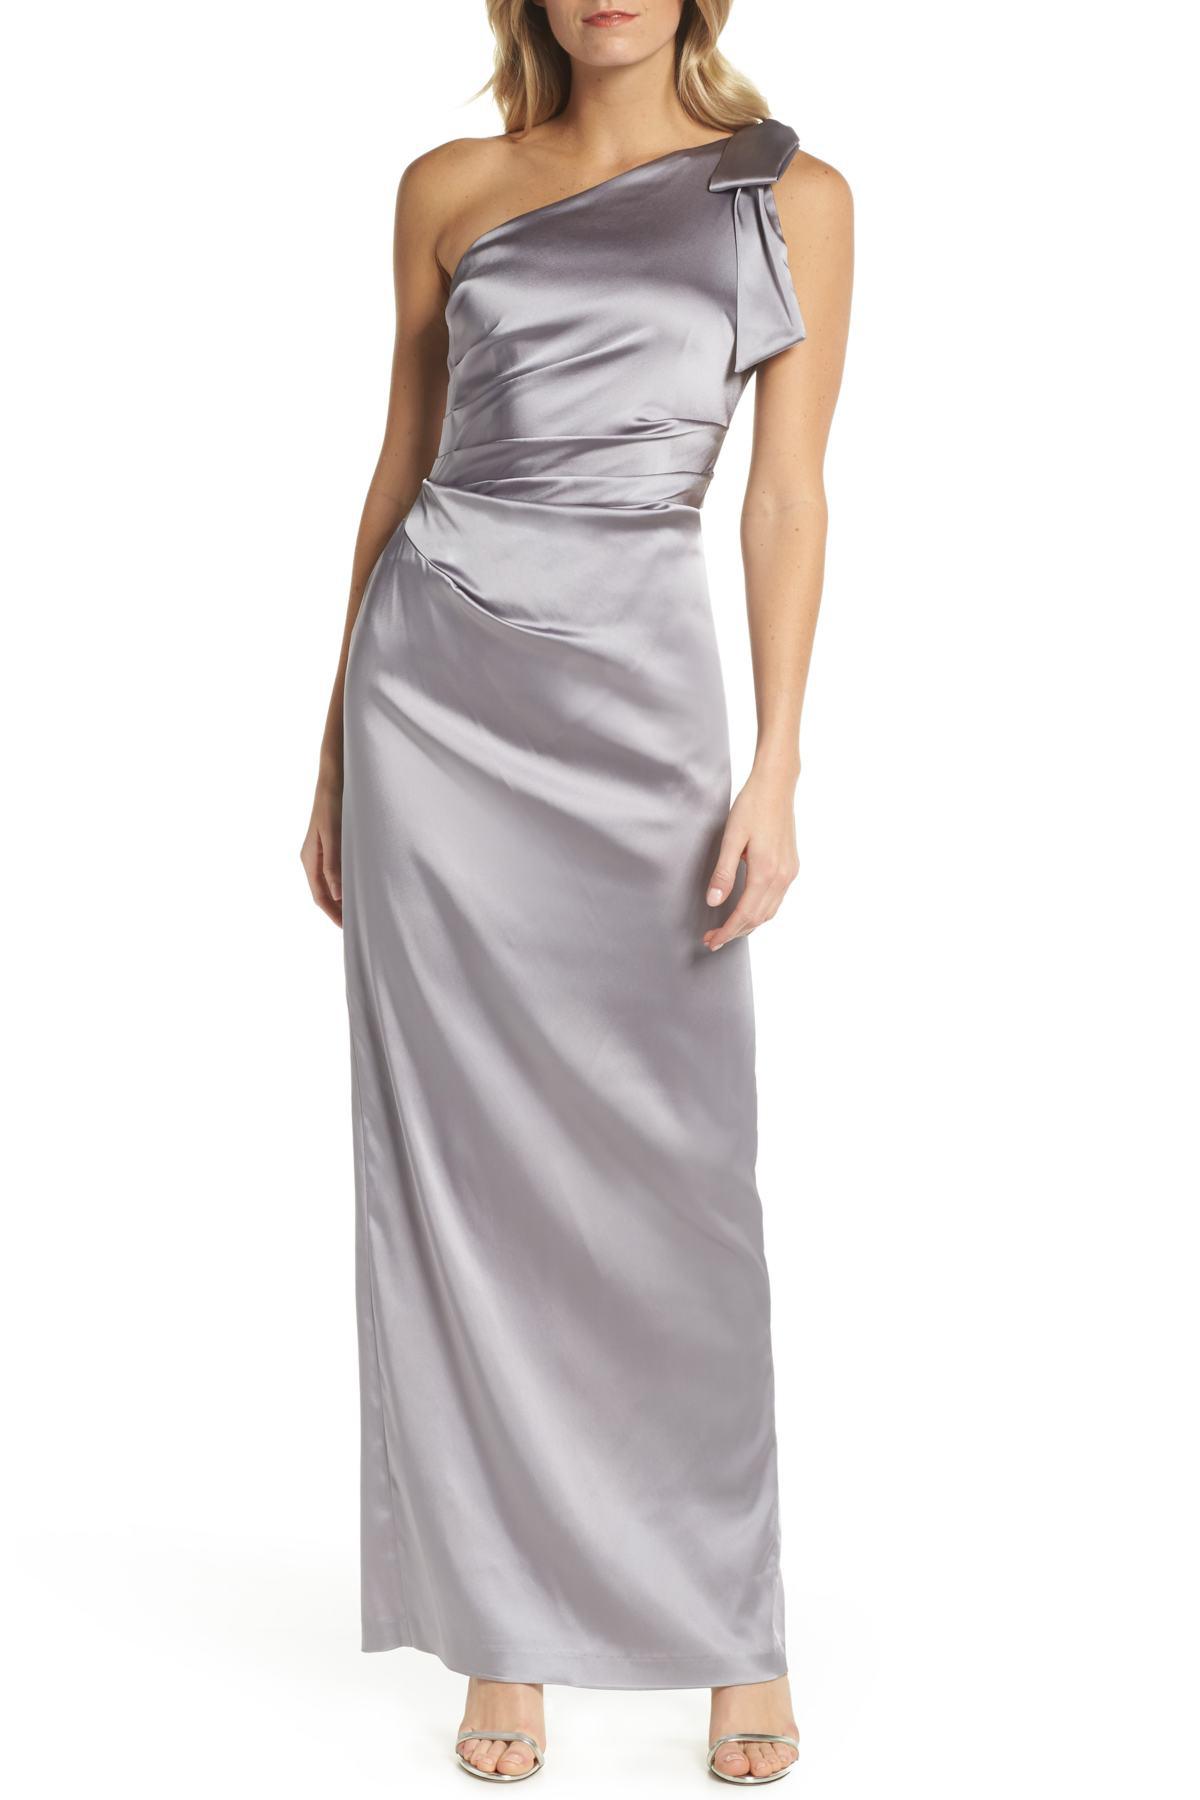 Adrianna Papell One-shoulder Stretch Satin Gown in Silver (Metallic) - Lyst